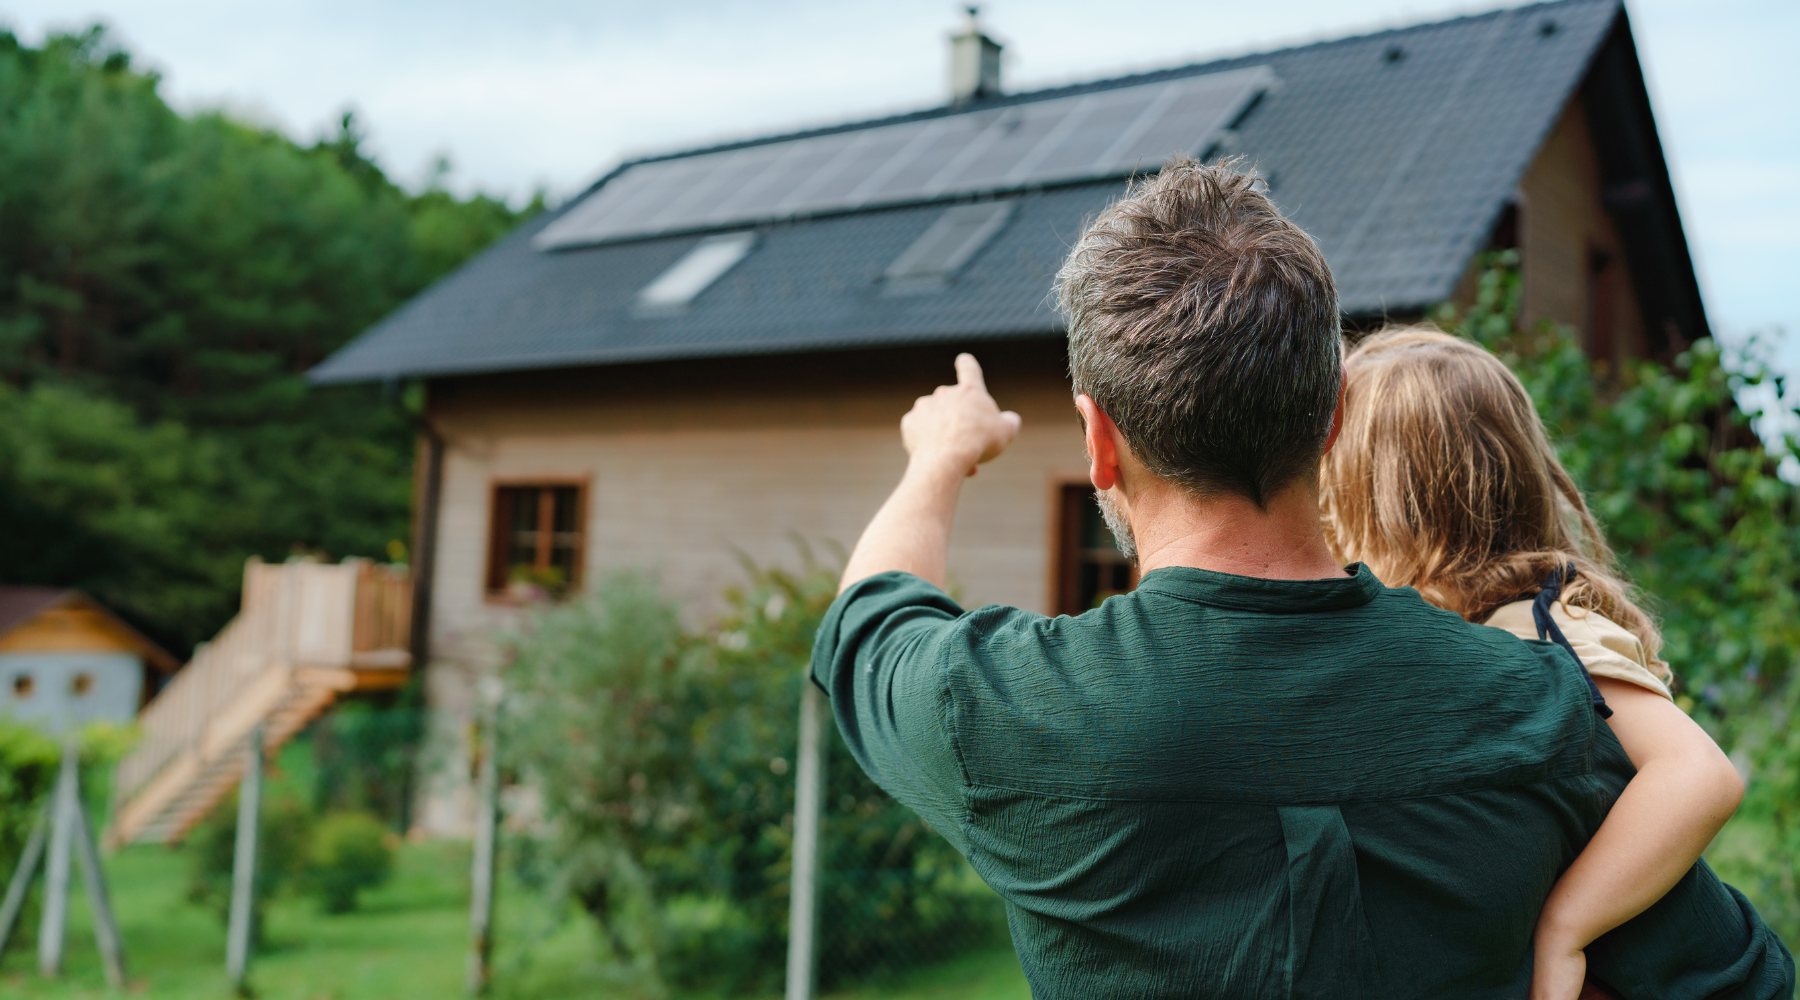 A father showing the solar & backup power system to his daughter on the roof of their house.  